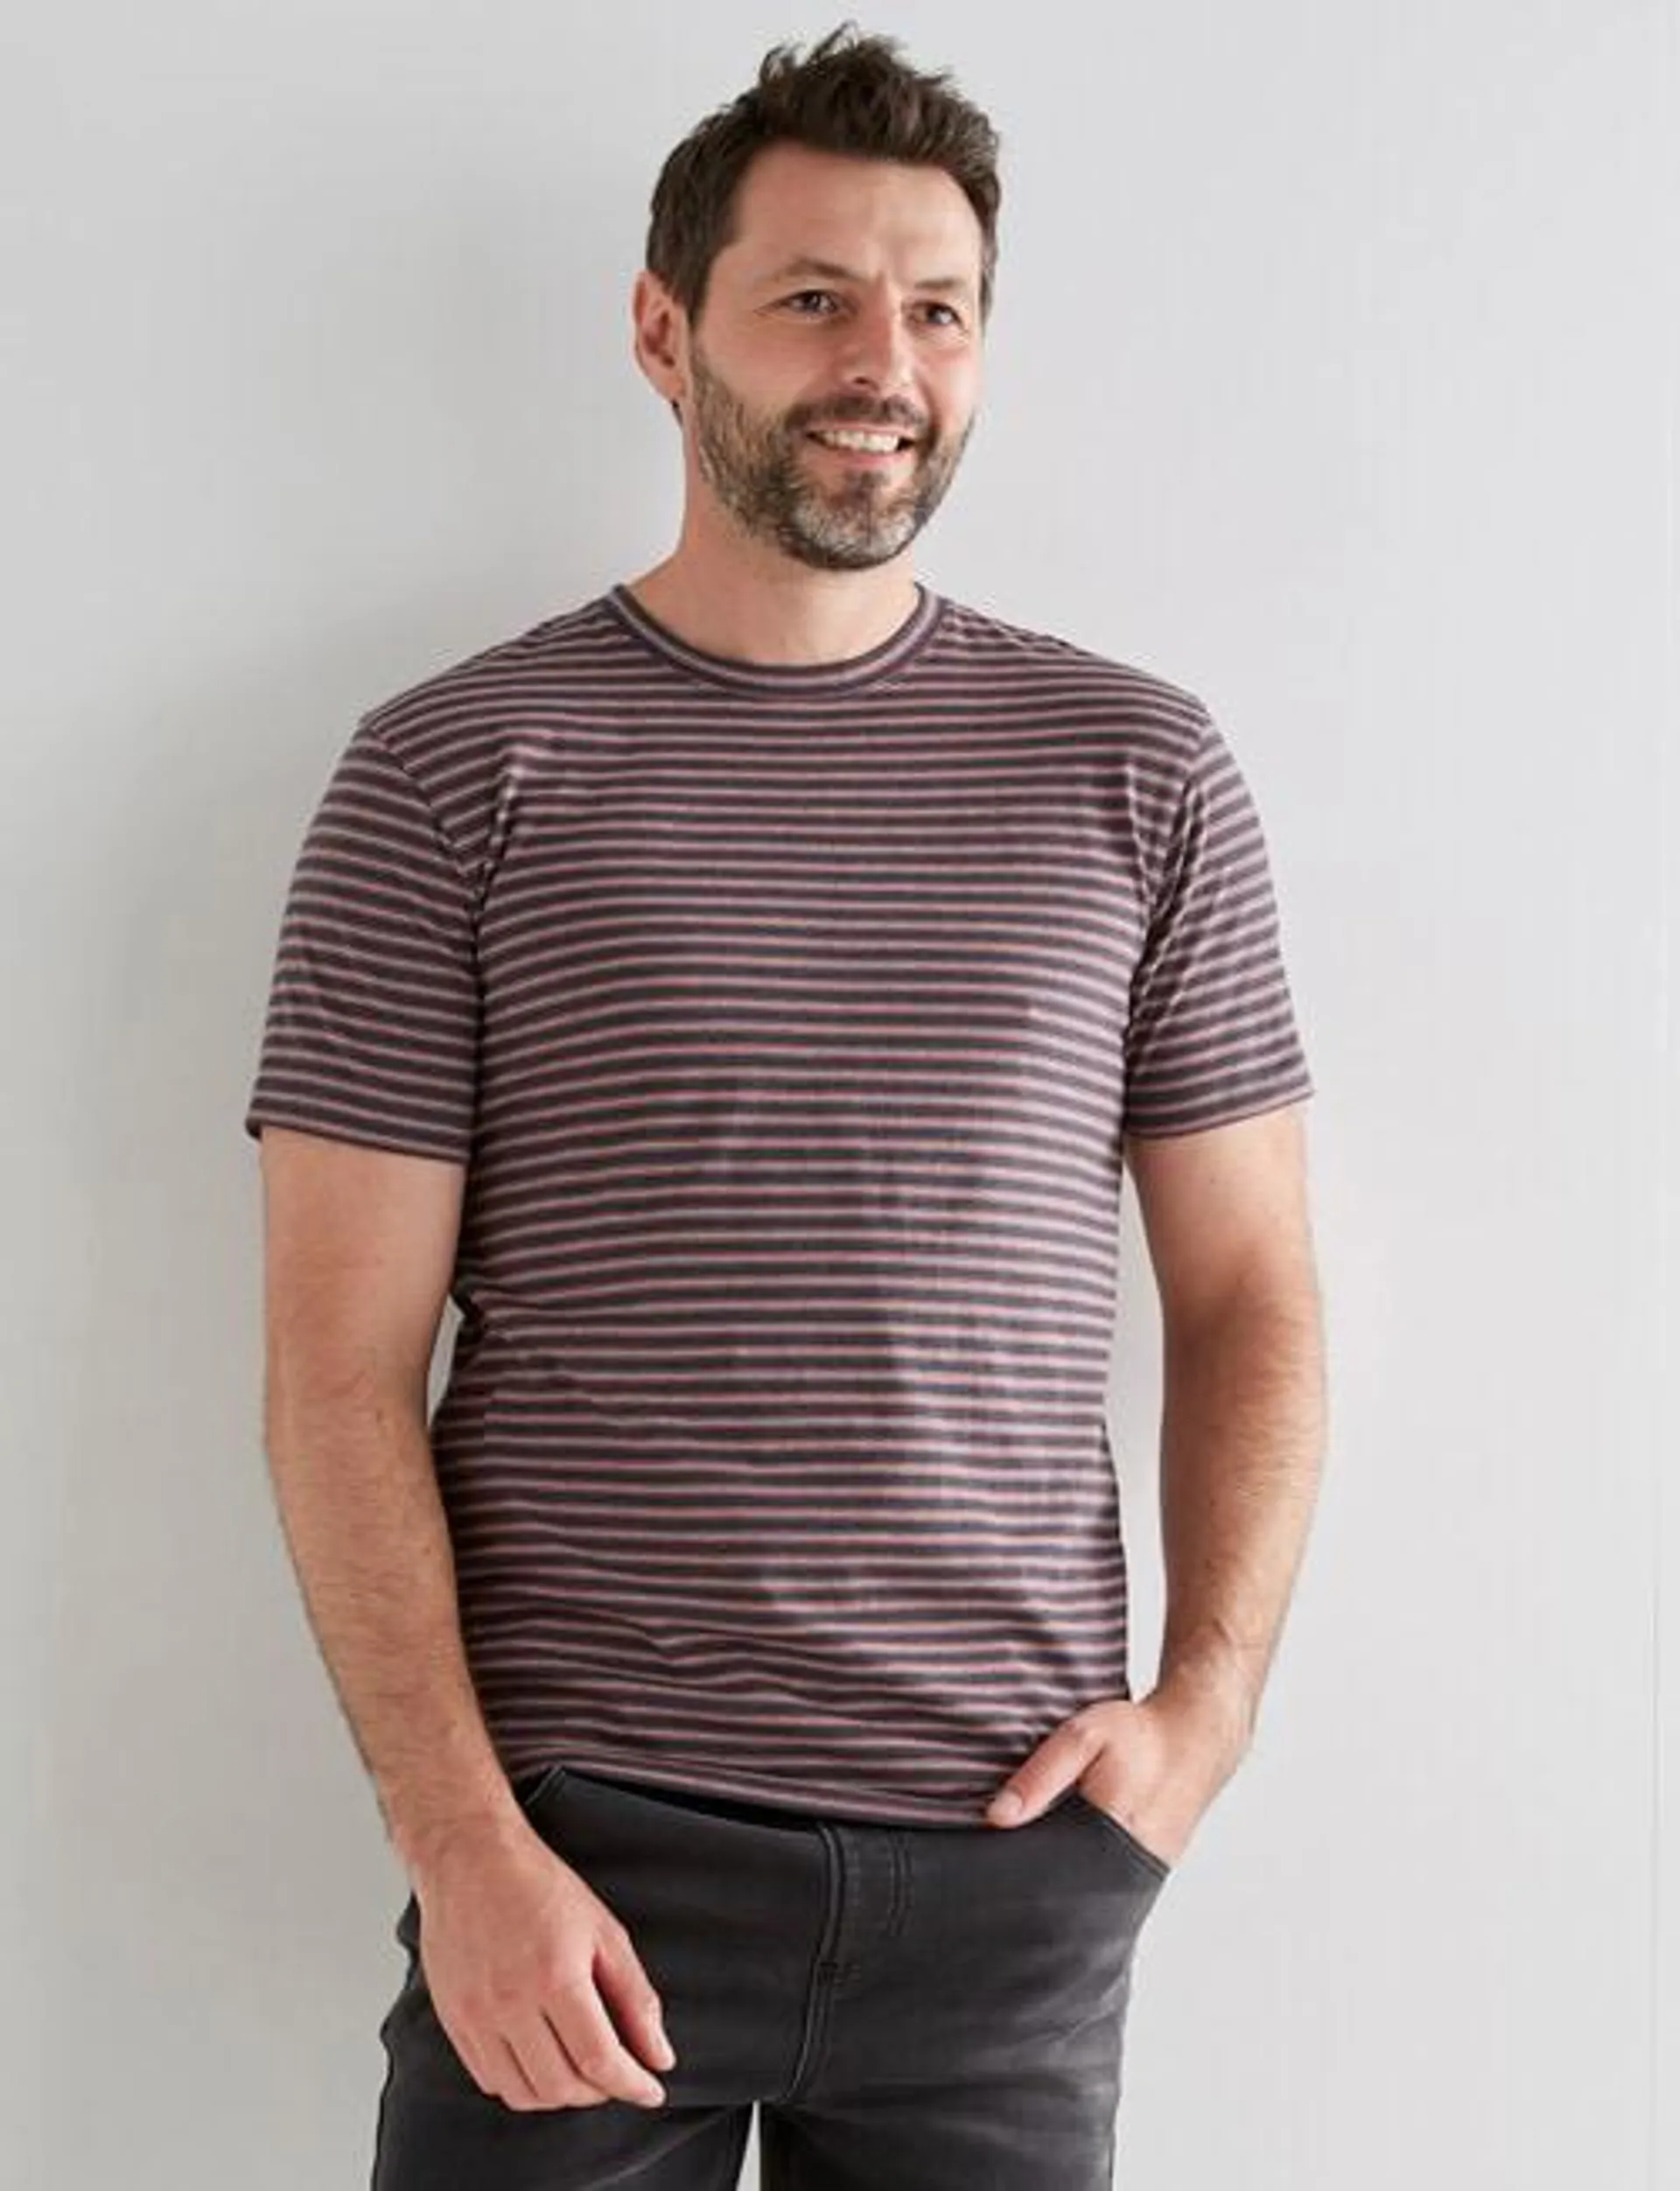 Chisel Stripes Ultimate Crew Tee, Charcoal Marle